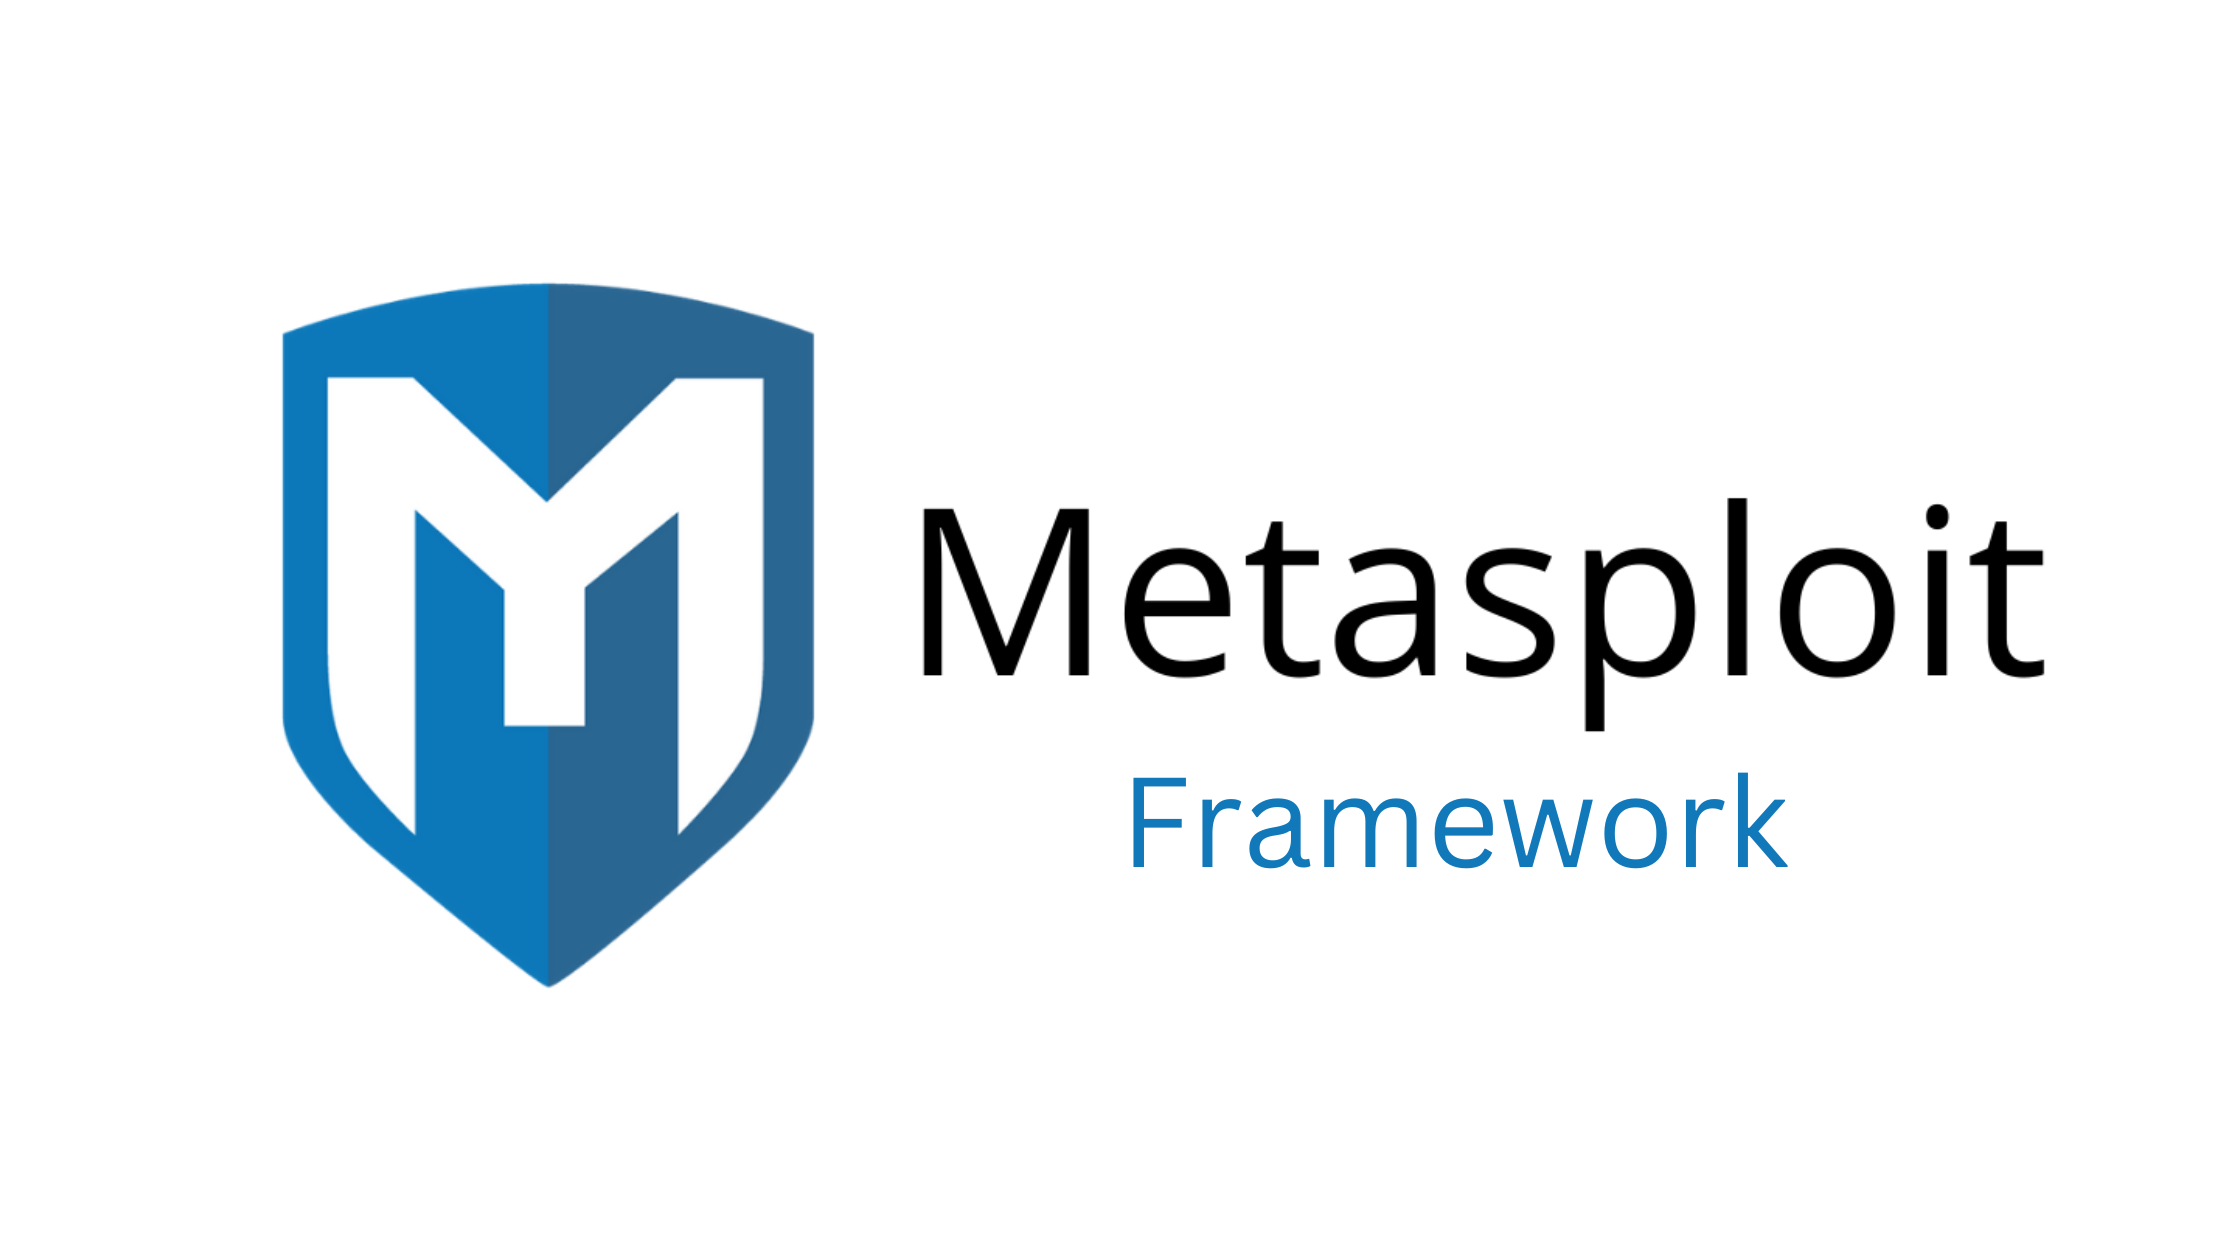 The Metasploit Framework logo, featuring a shield with the letter 'M' in blue tones, alongside the text "Metasploit Framework".